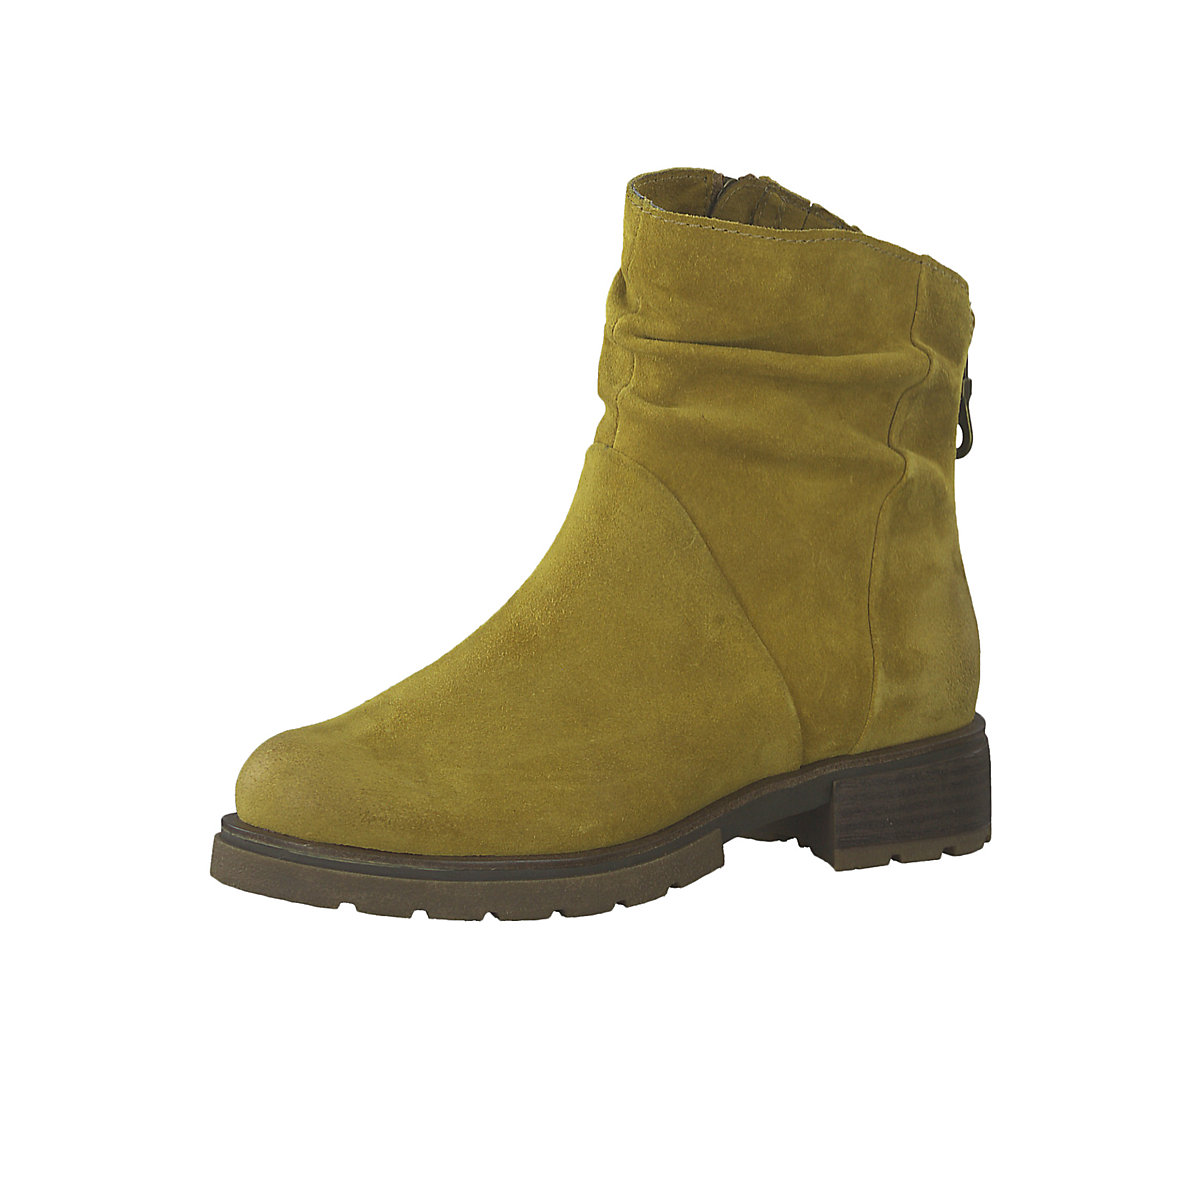 MARCO TOZZI Damen Leder Stiefelette Ankle Boot Mustard Gelb 2-2-25866-33 606 Ankle Boots gelb